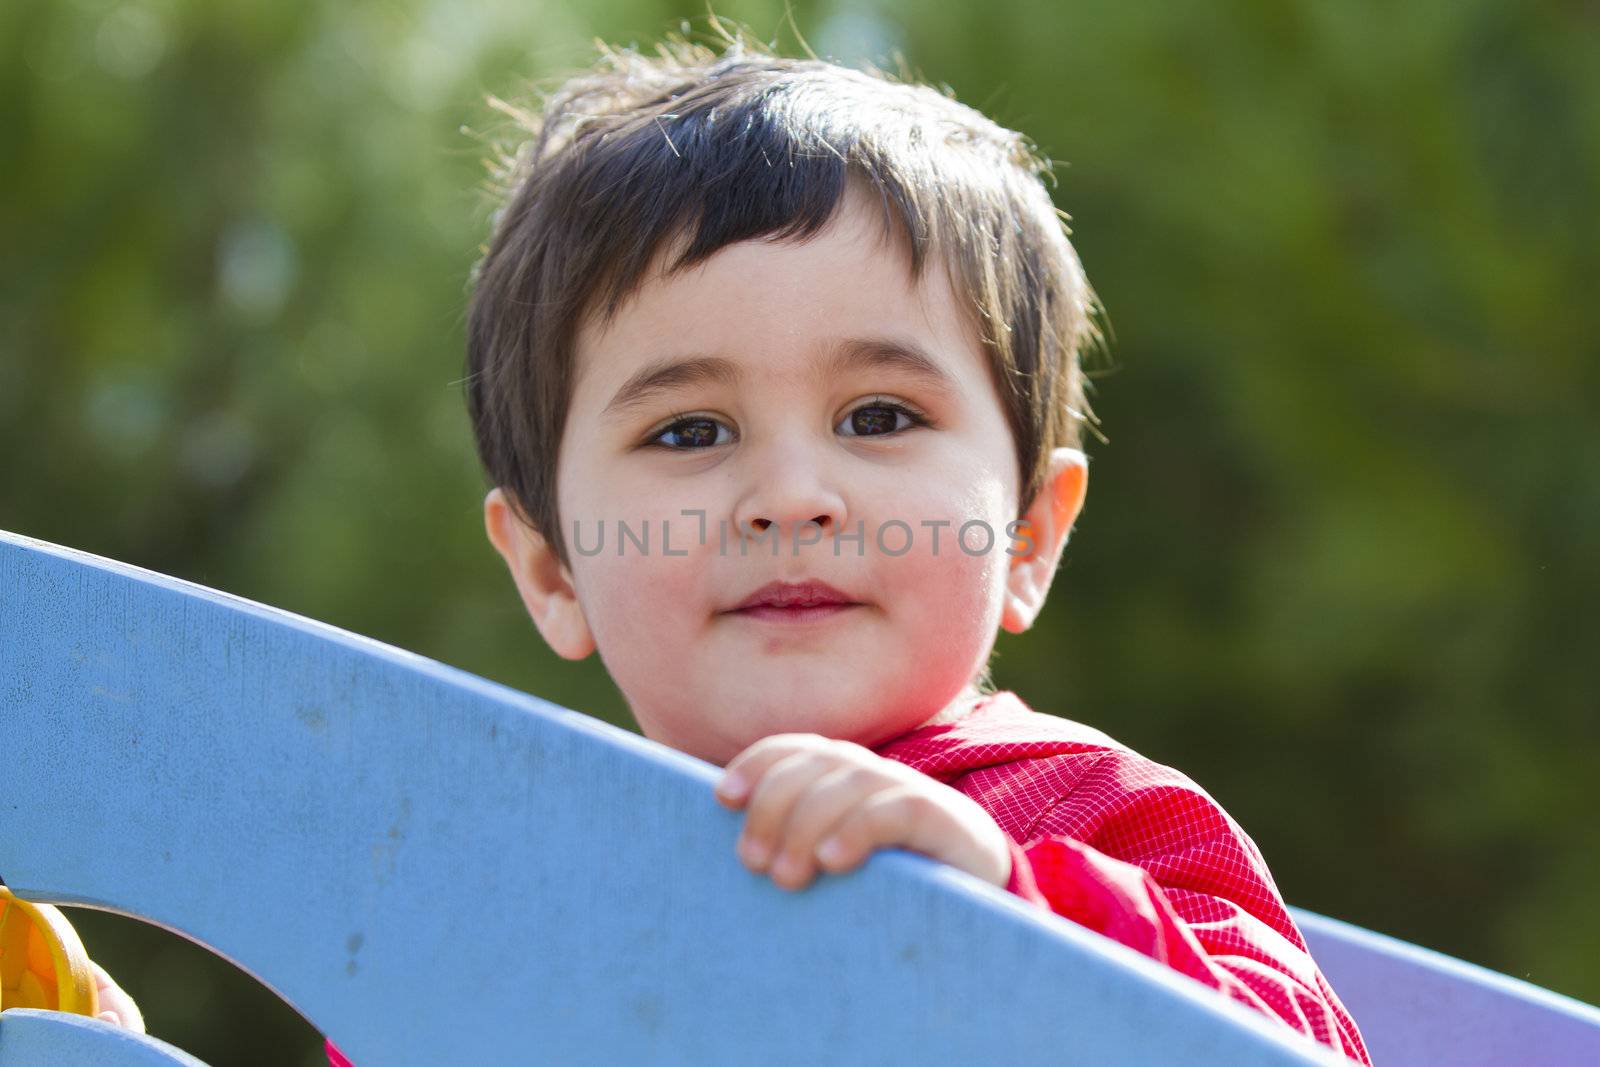 Cute little baby boy playing at park , smile